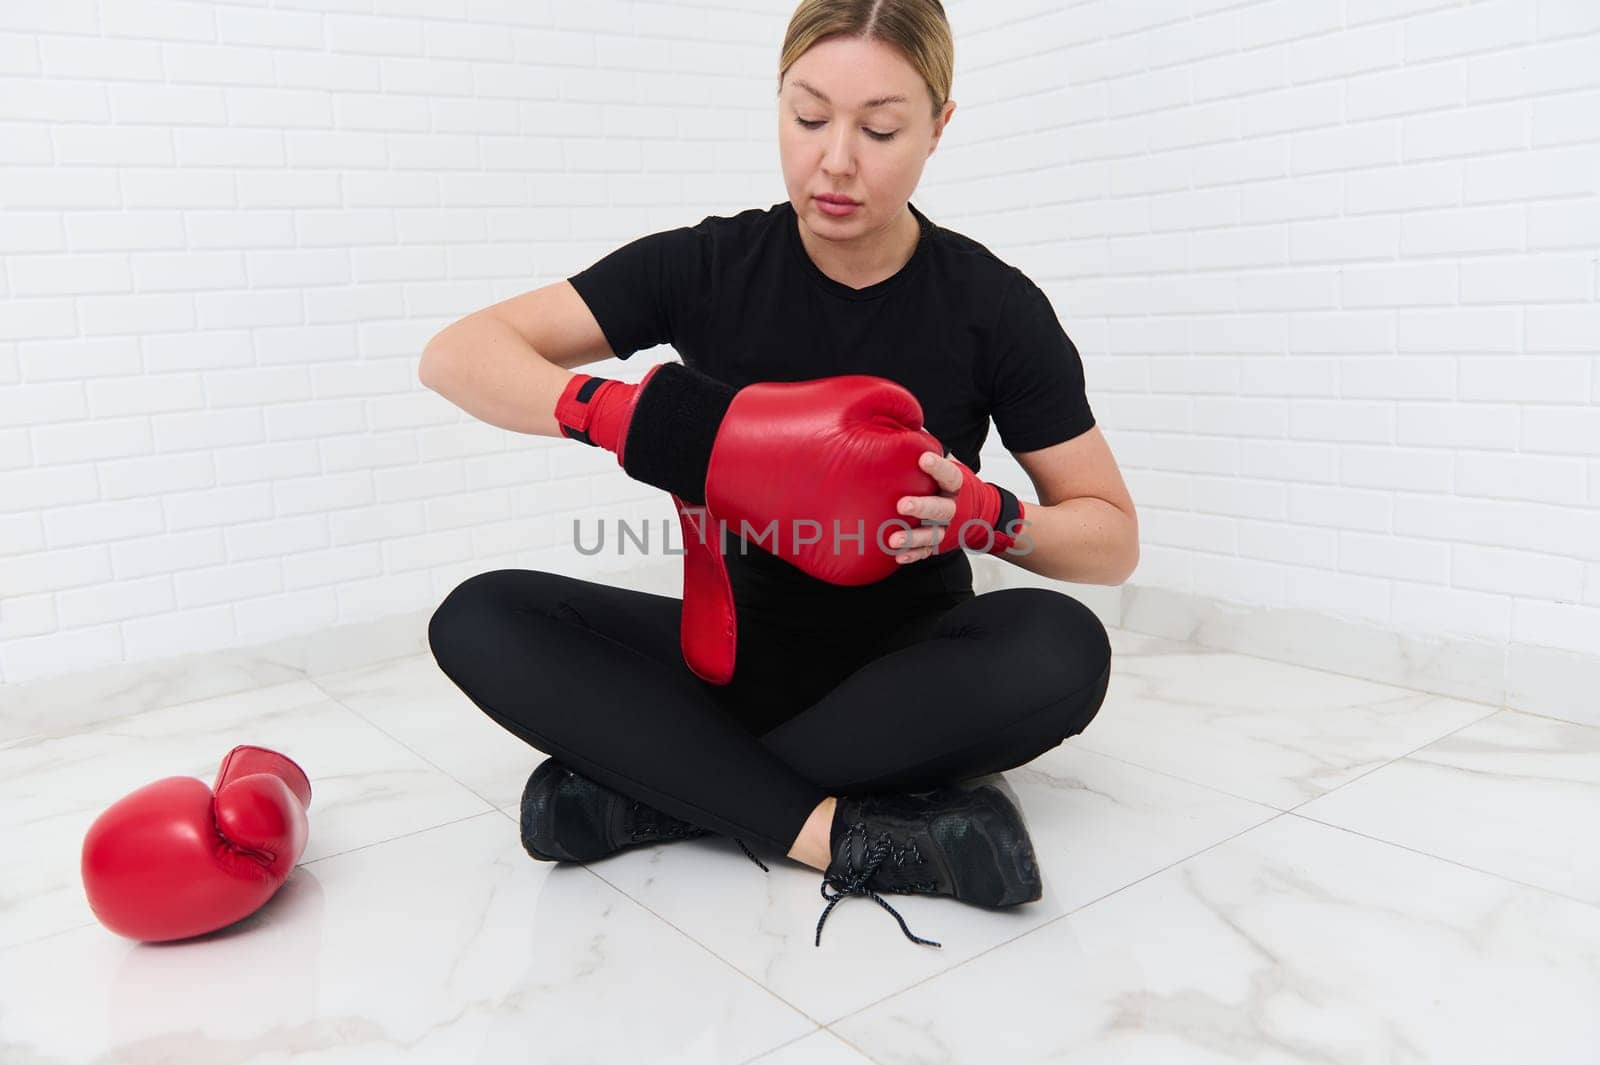 Young blonde female boxer fighter preparing for boxing training, putting on red boxing gloves, sitting in lotus pose against white brick background. Athletic discipline, sport, combat, martial art.